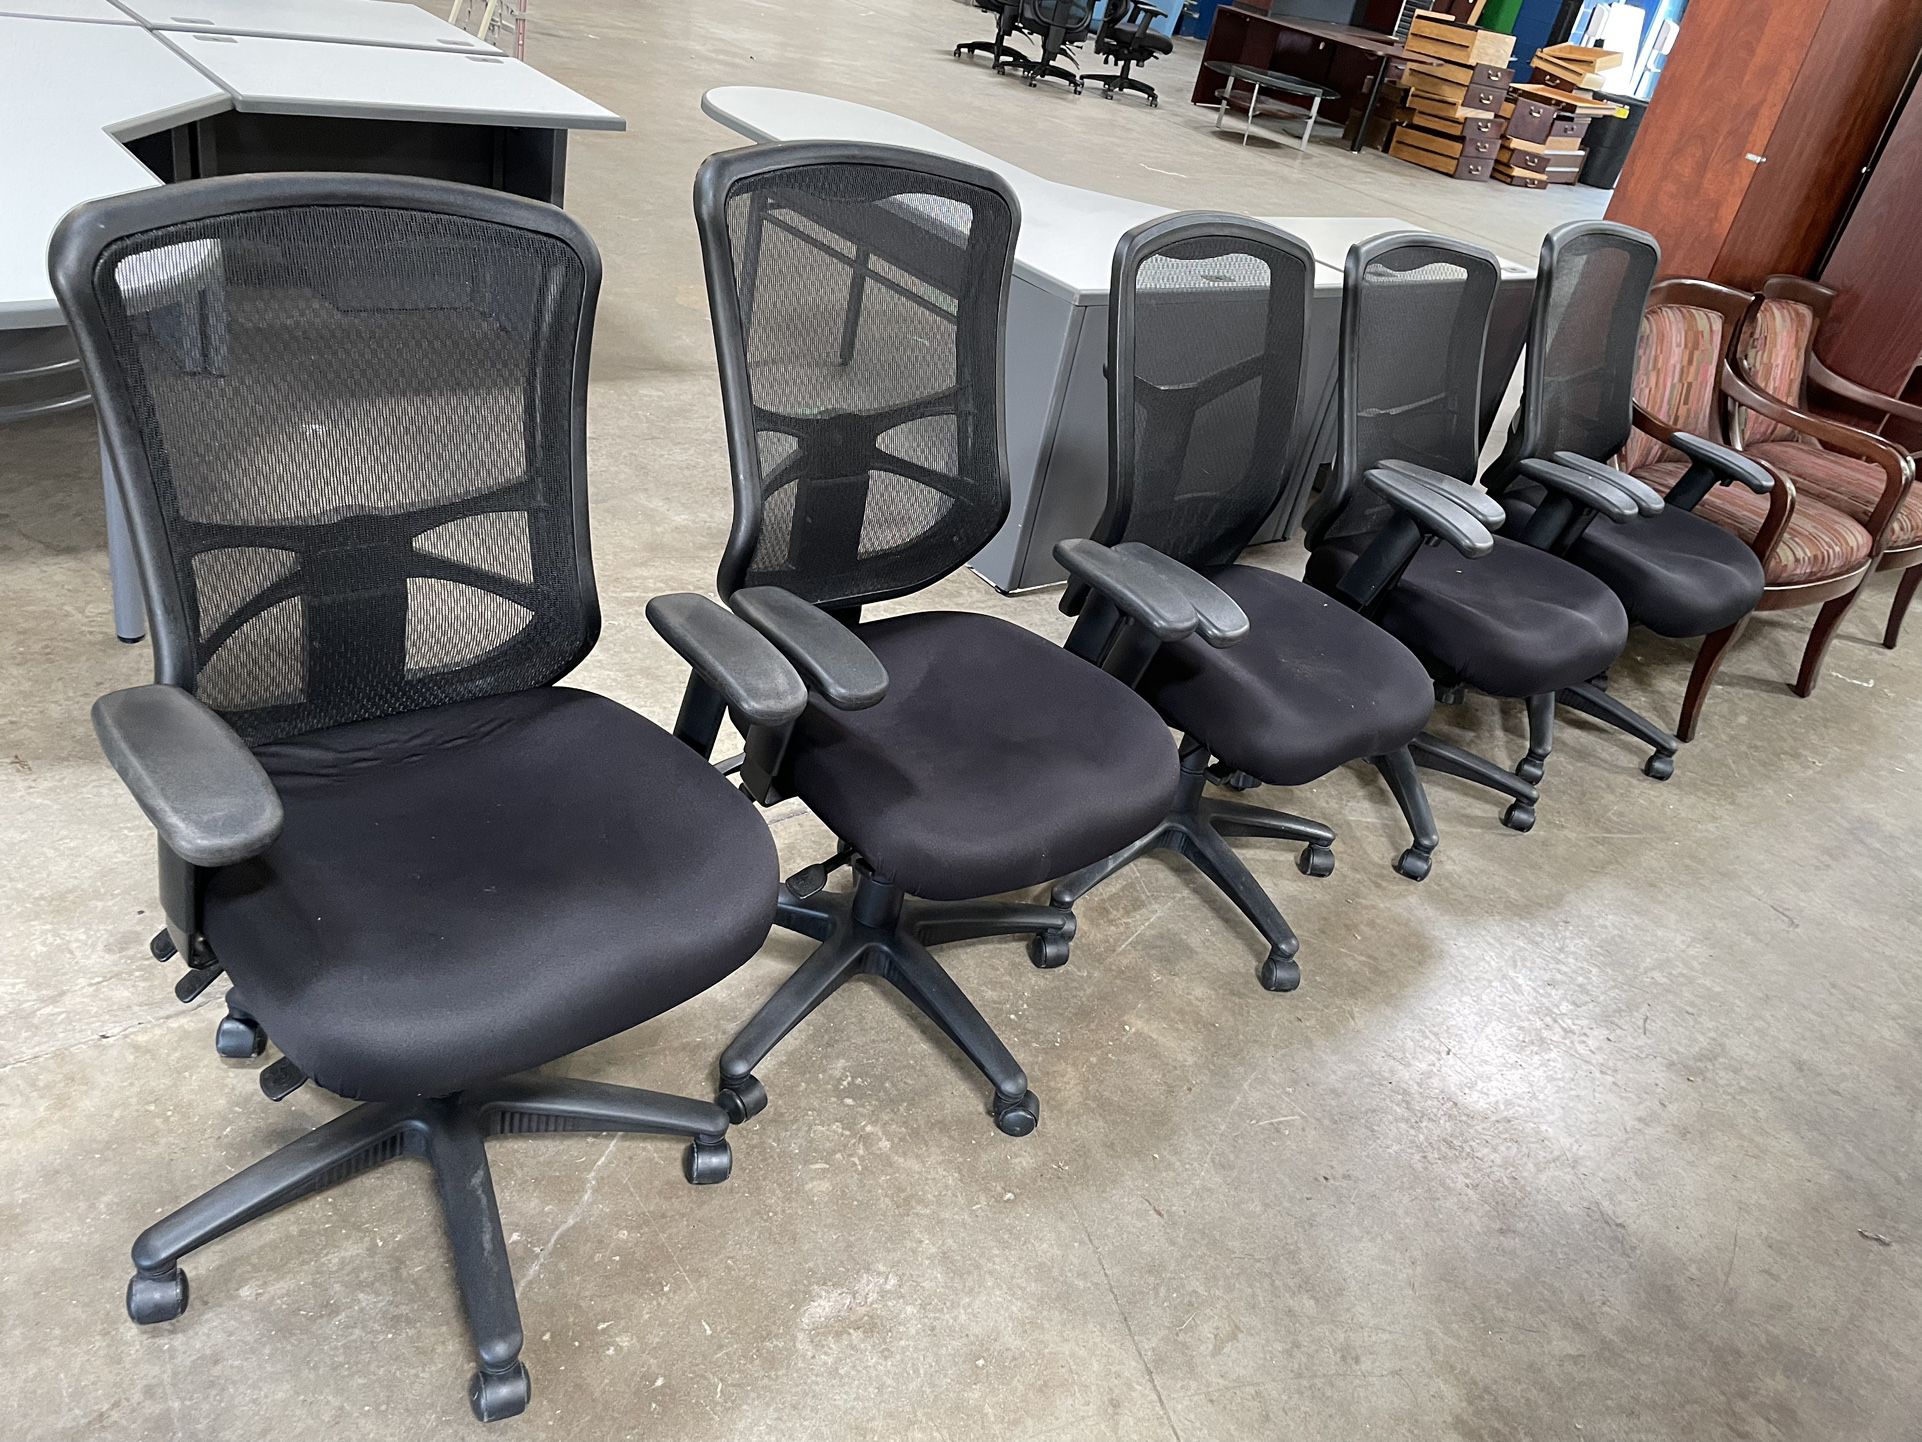 5 Matching Black Mesh Office Rolling Computer Chairs For Only $50 Ea!!